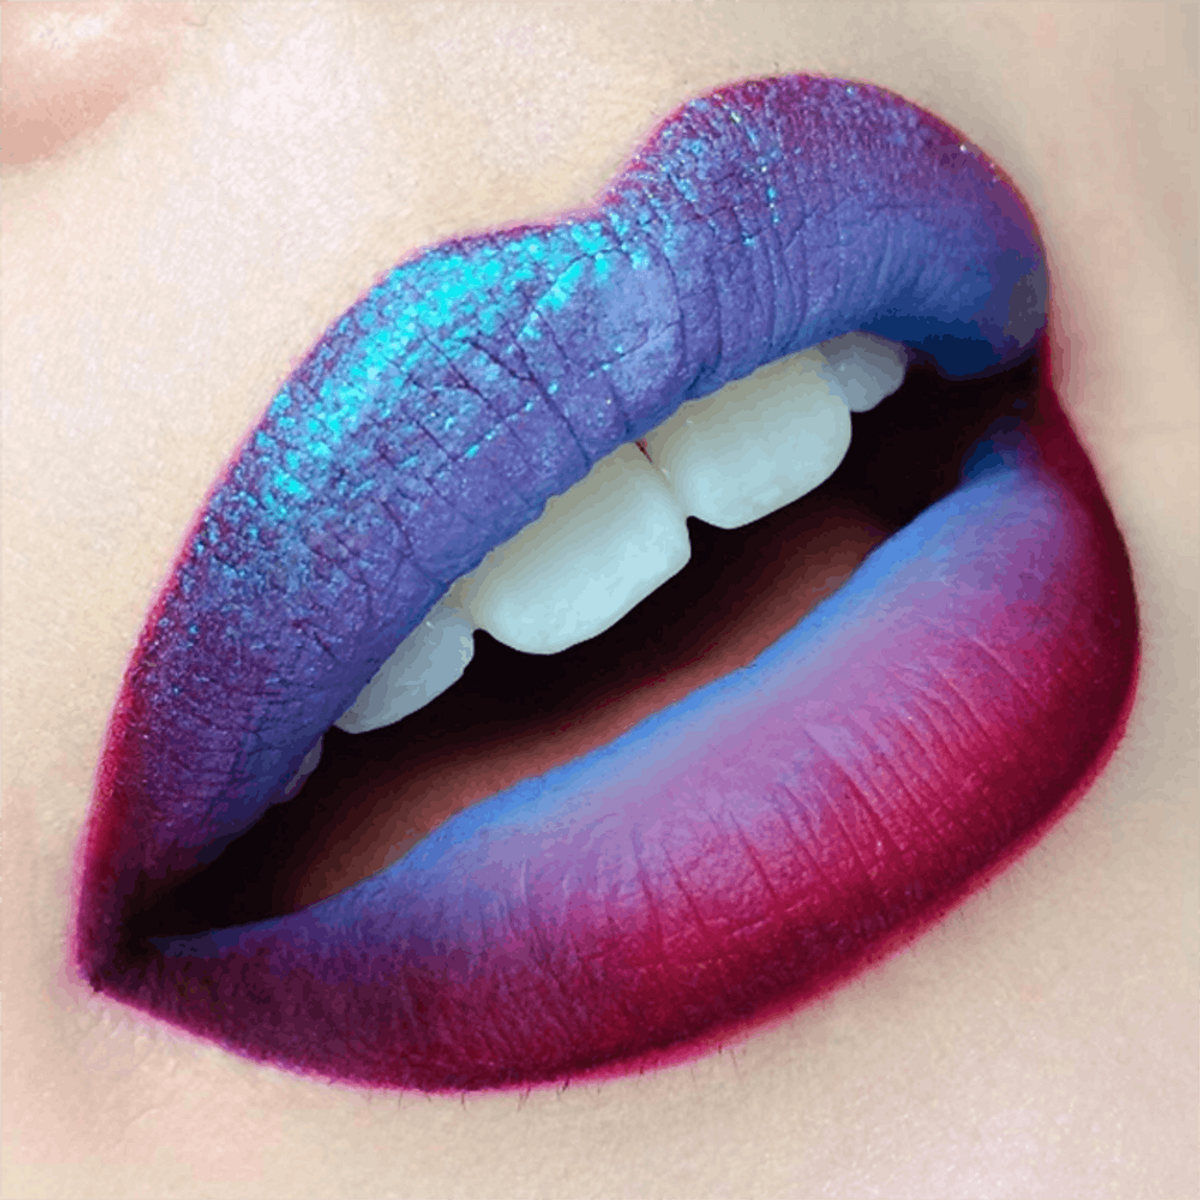 You’ve Gotta Try These Ombre Lips for Your Next Holiday Party